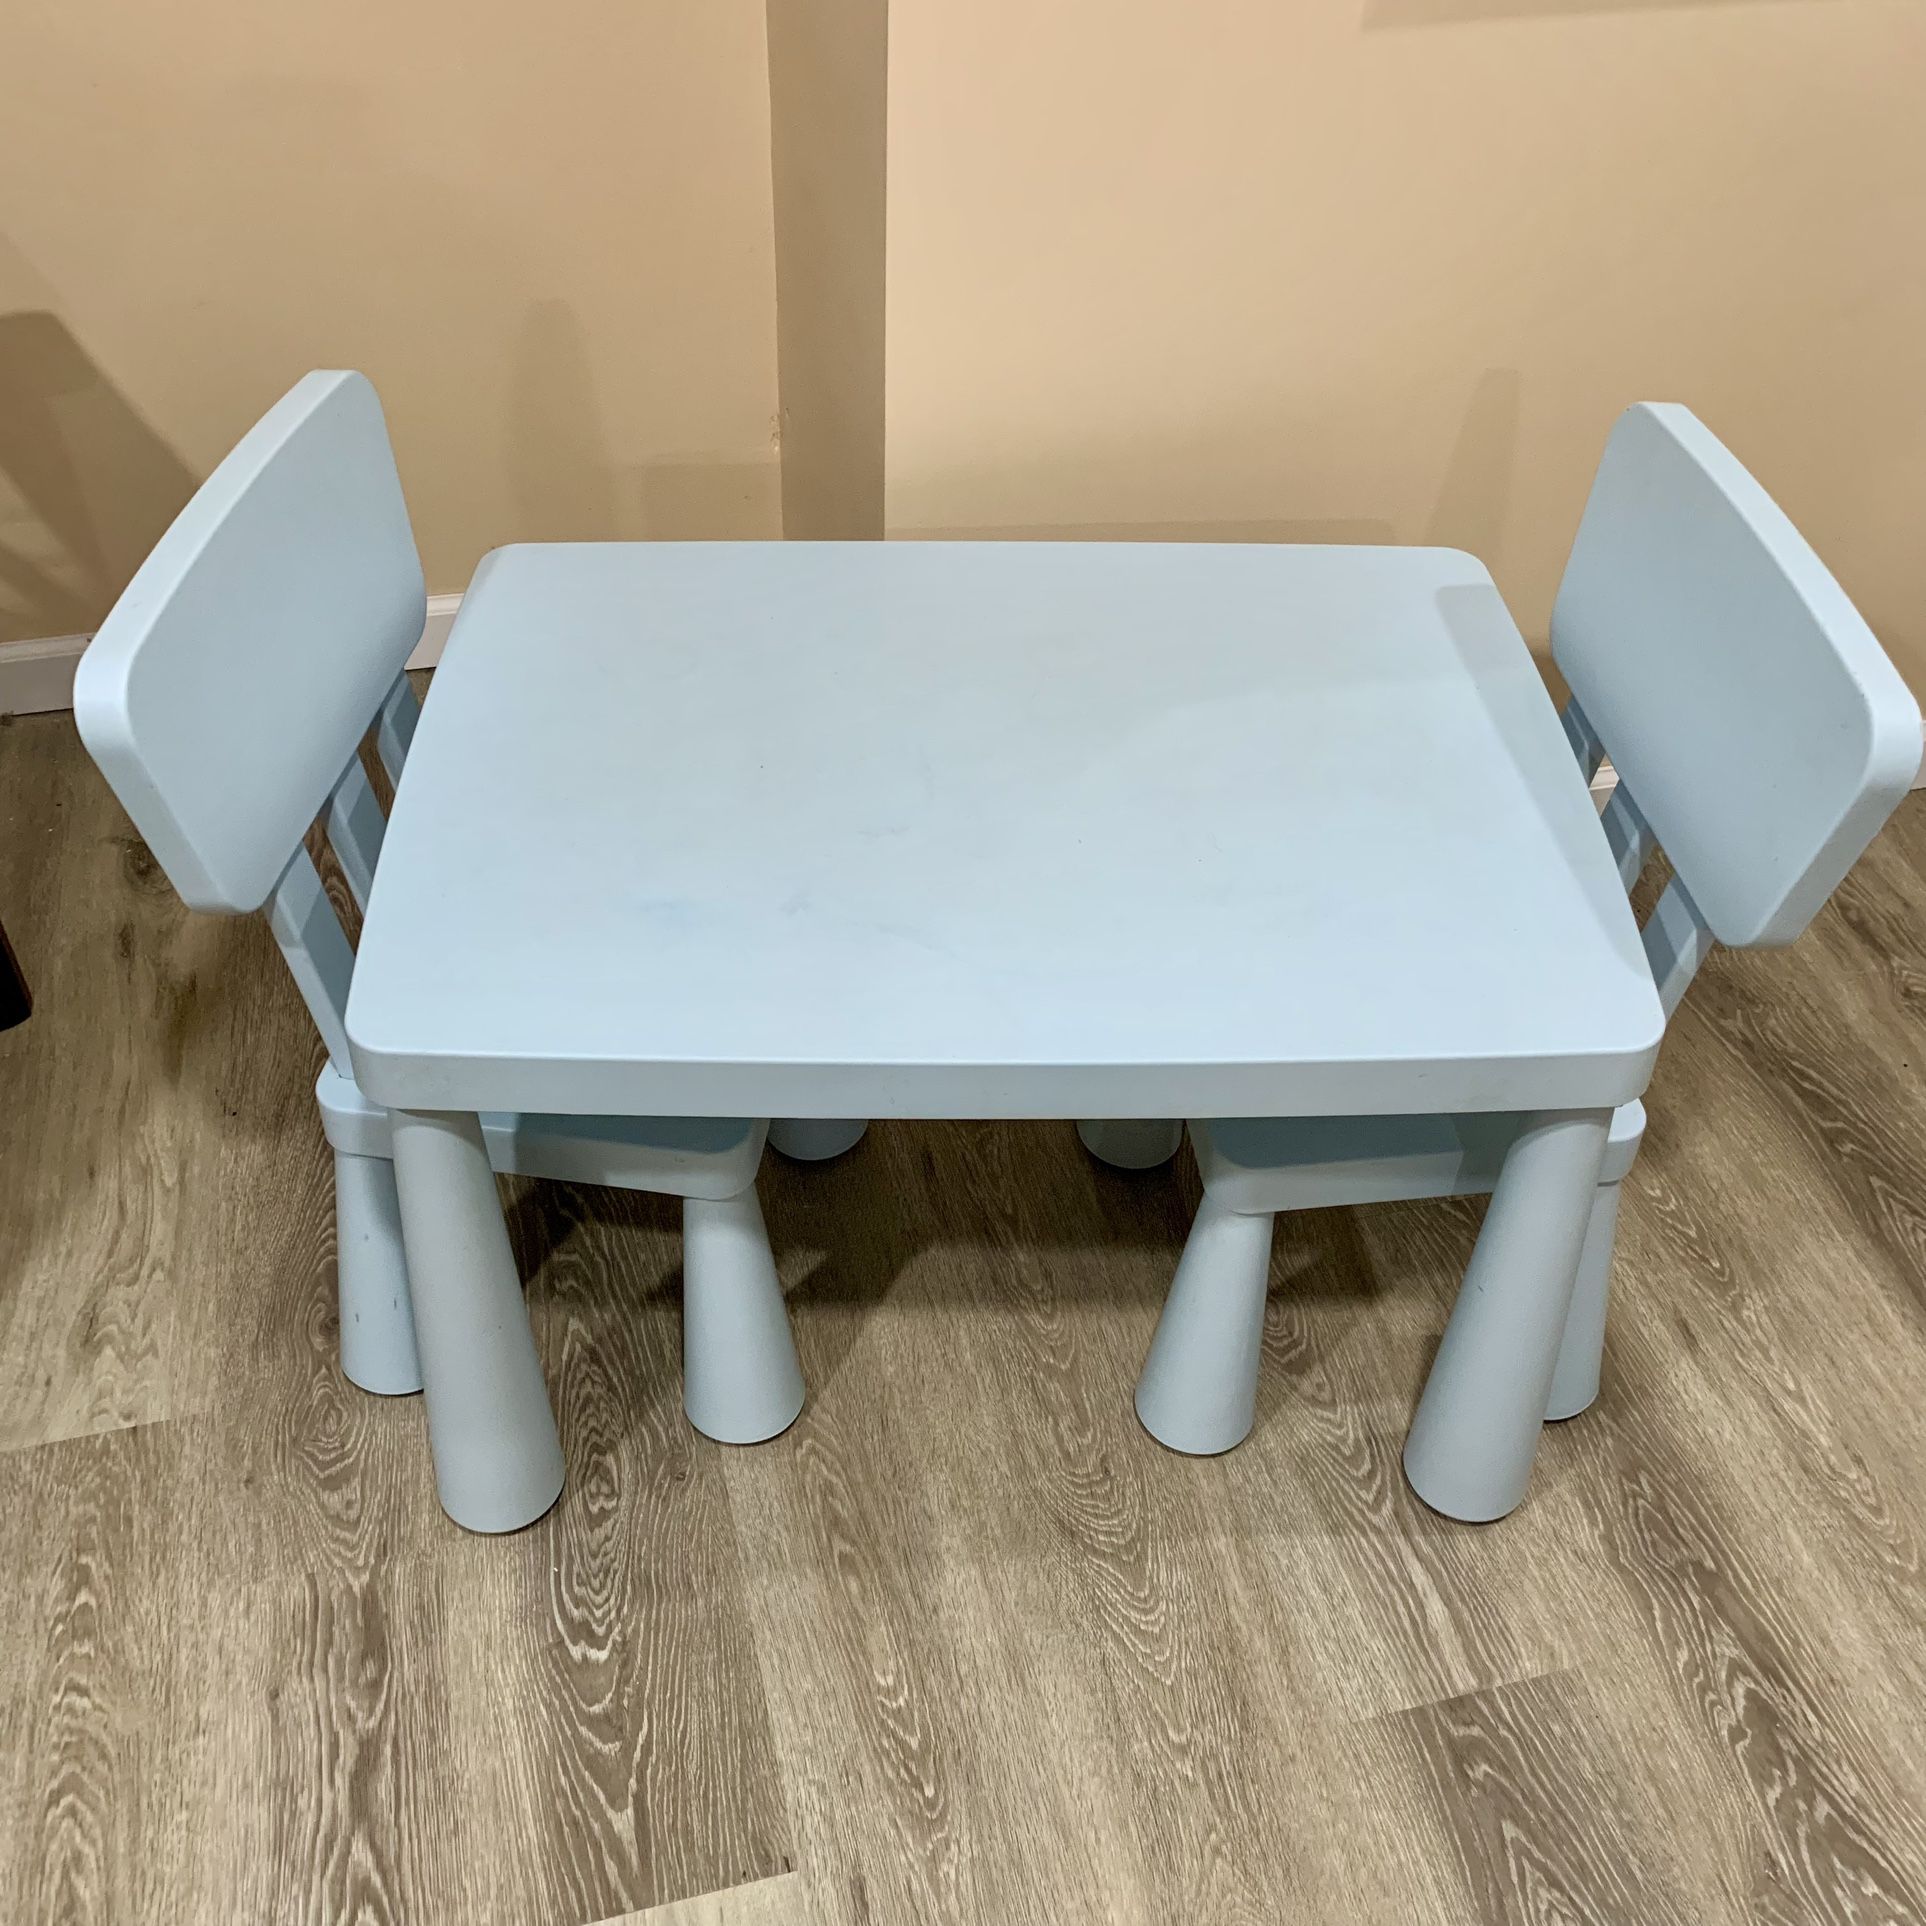 Kids furniture: Table with 2 chairs